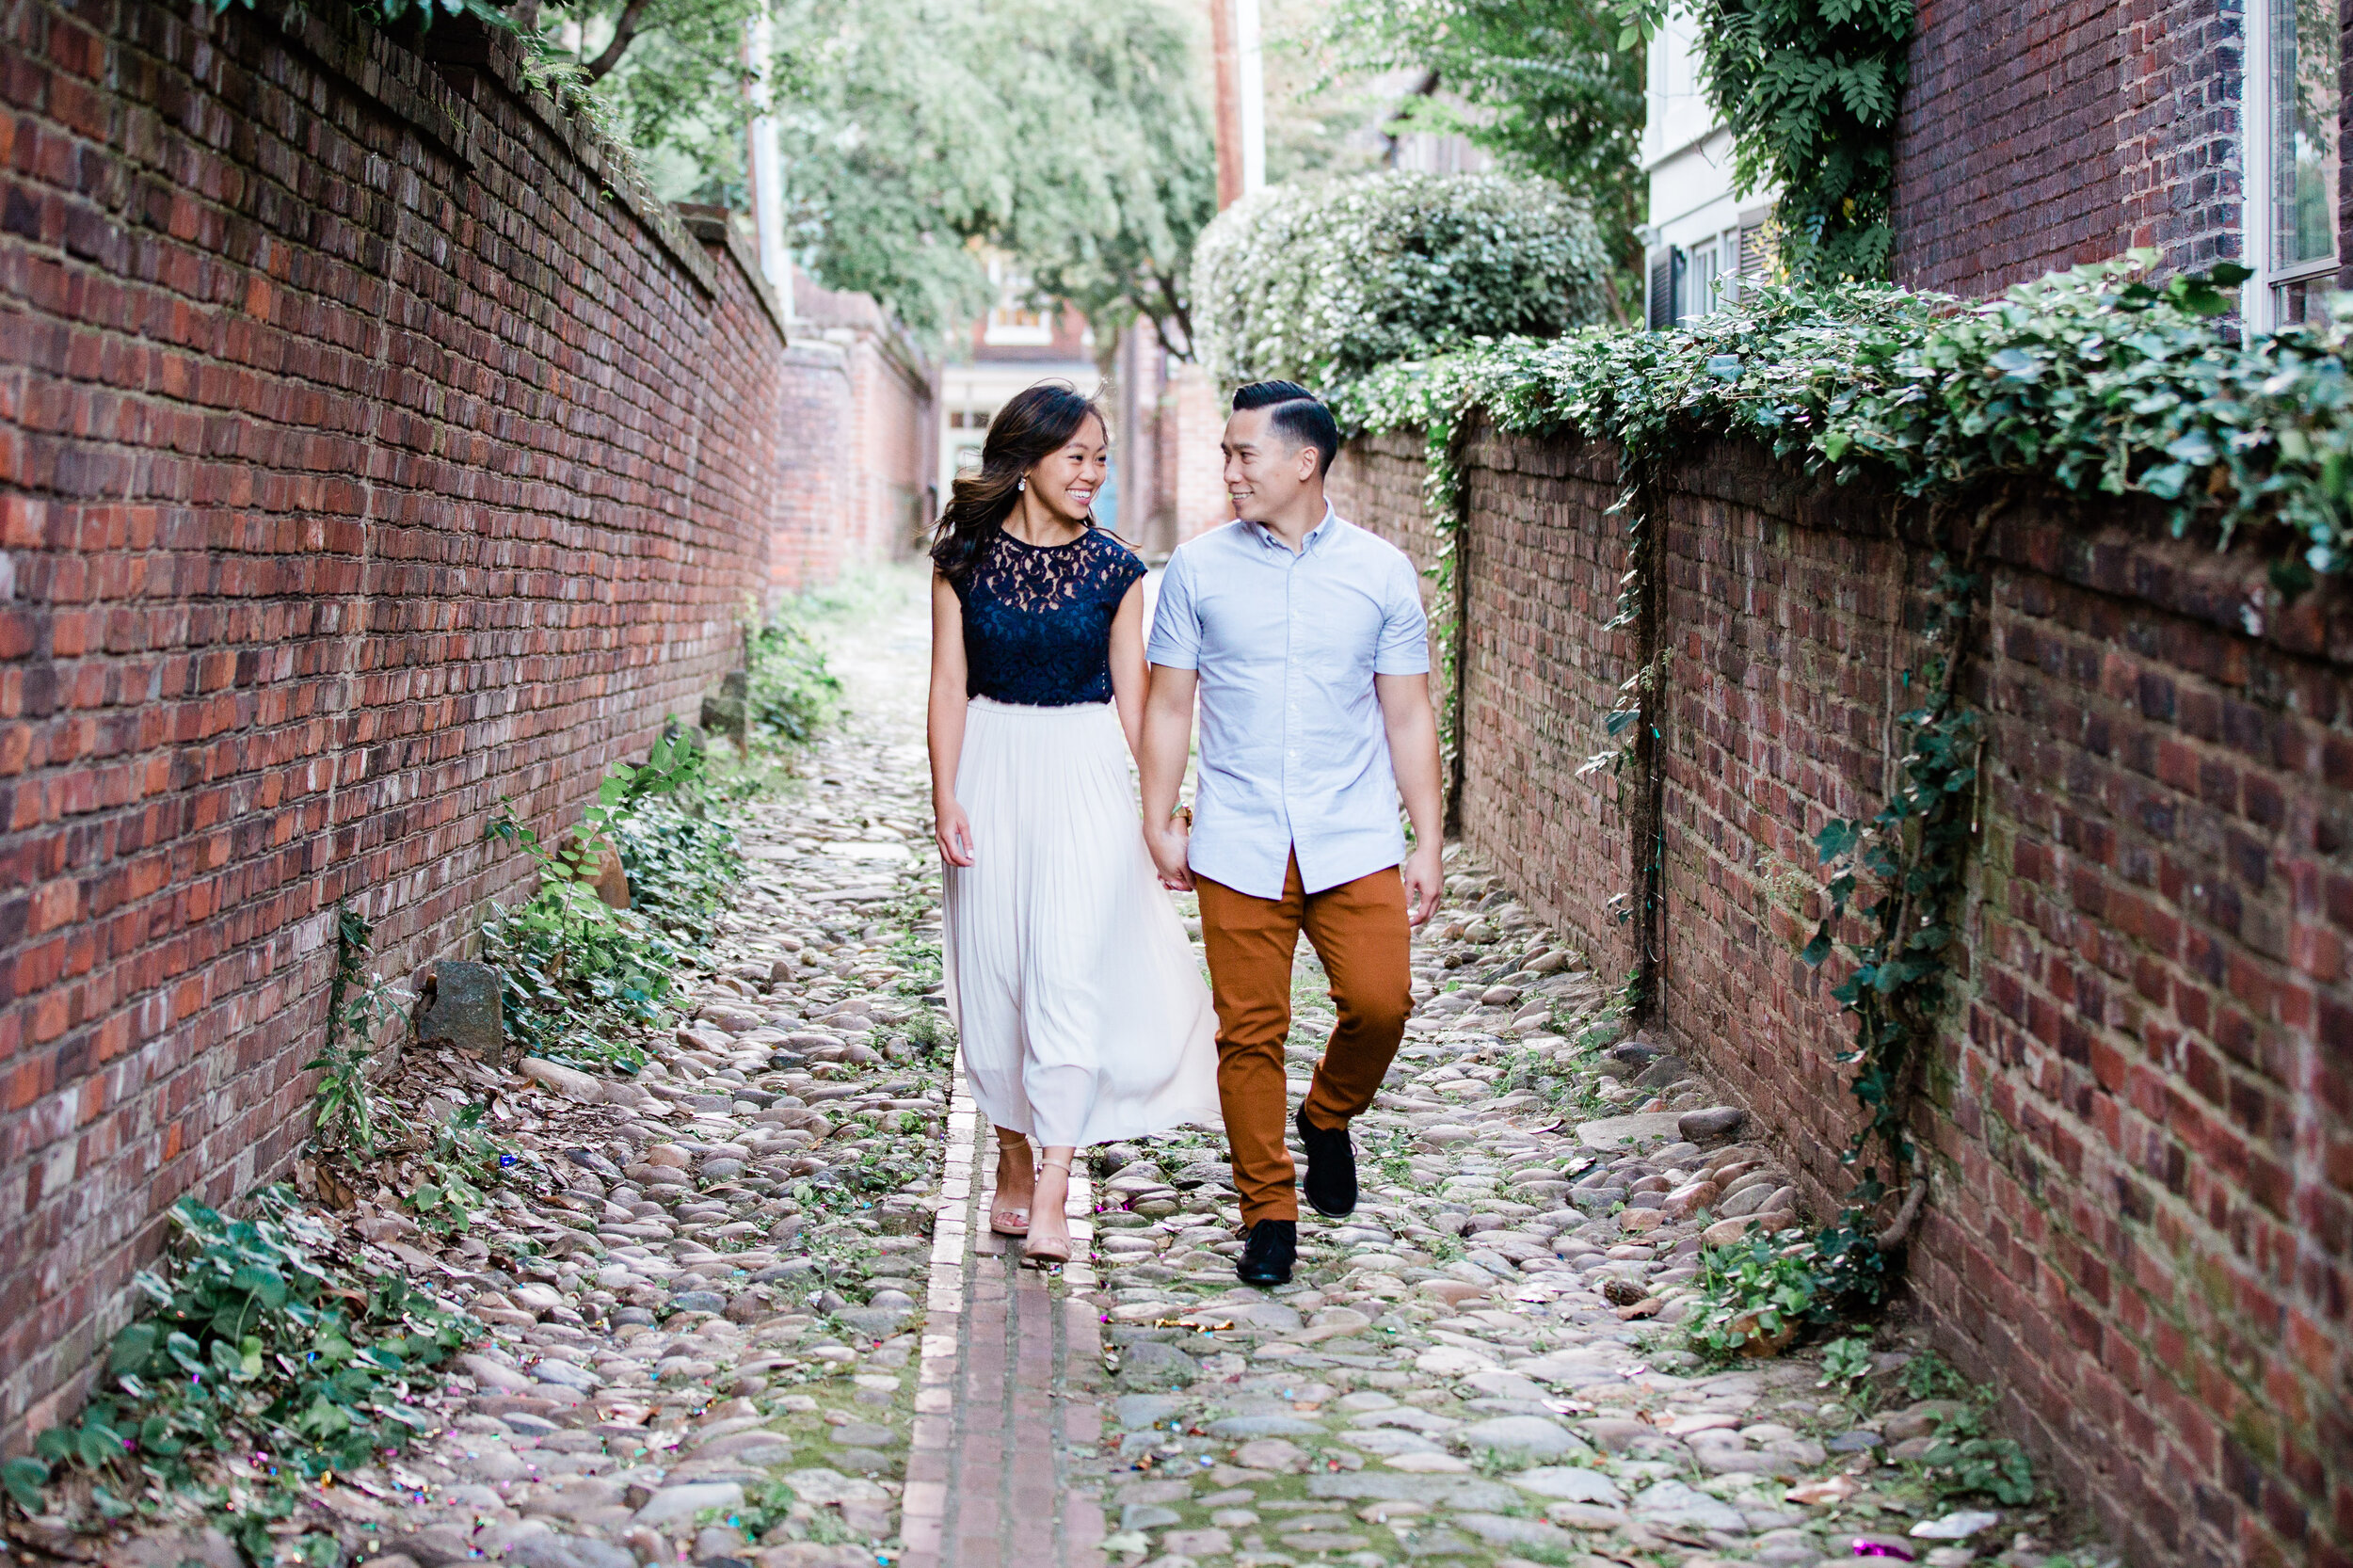 old_town_alexandria_engagements-4403.jpg